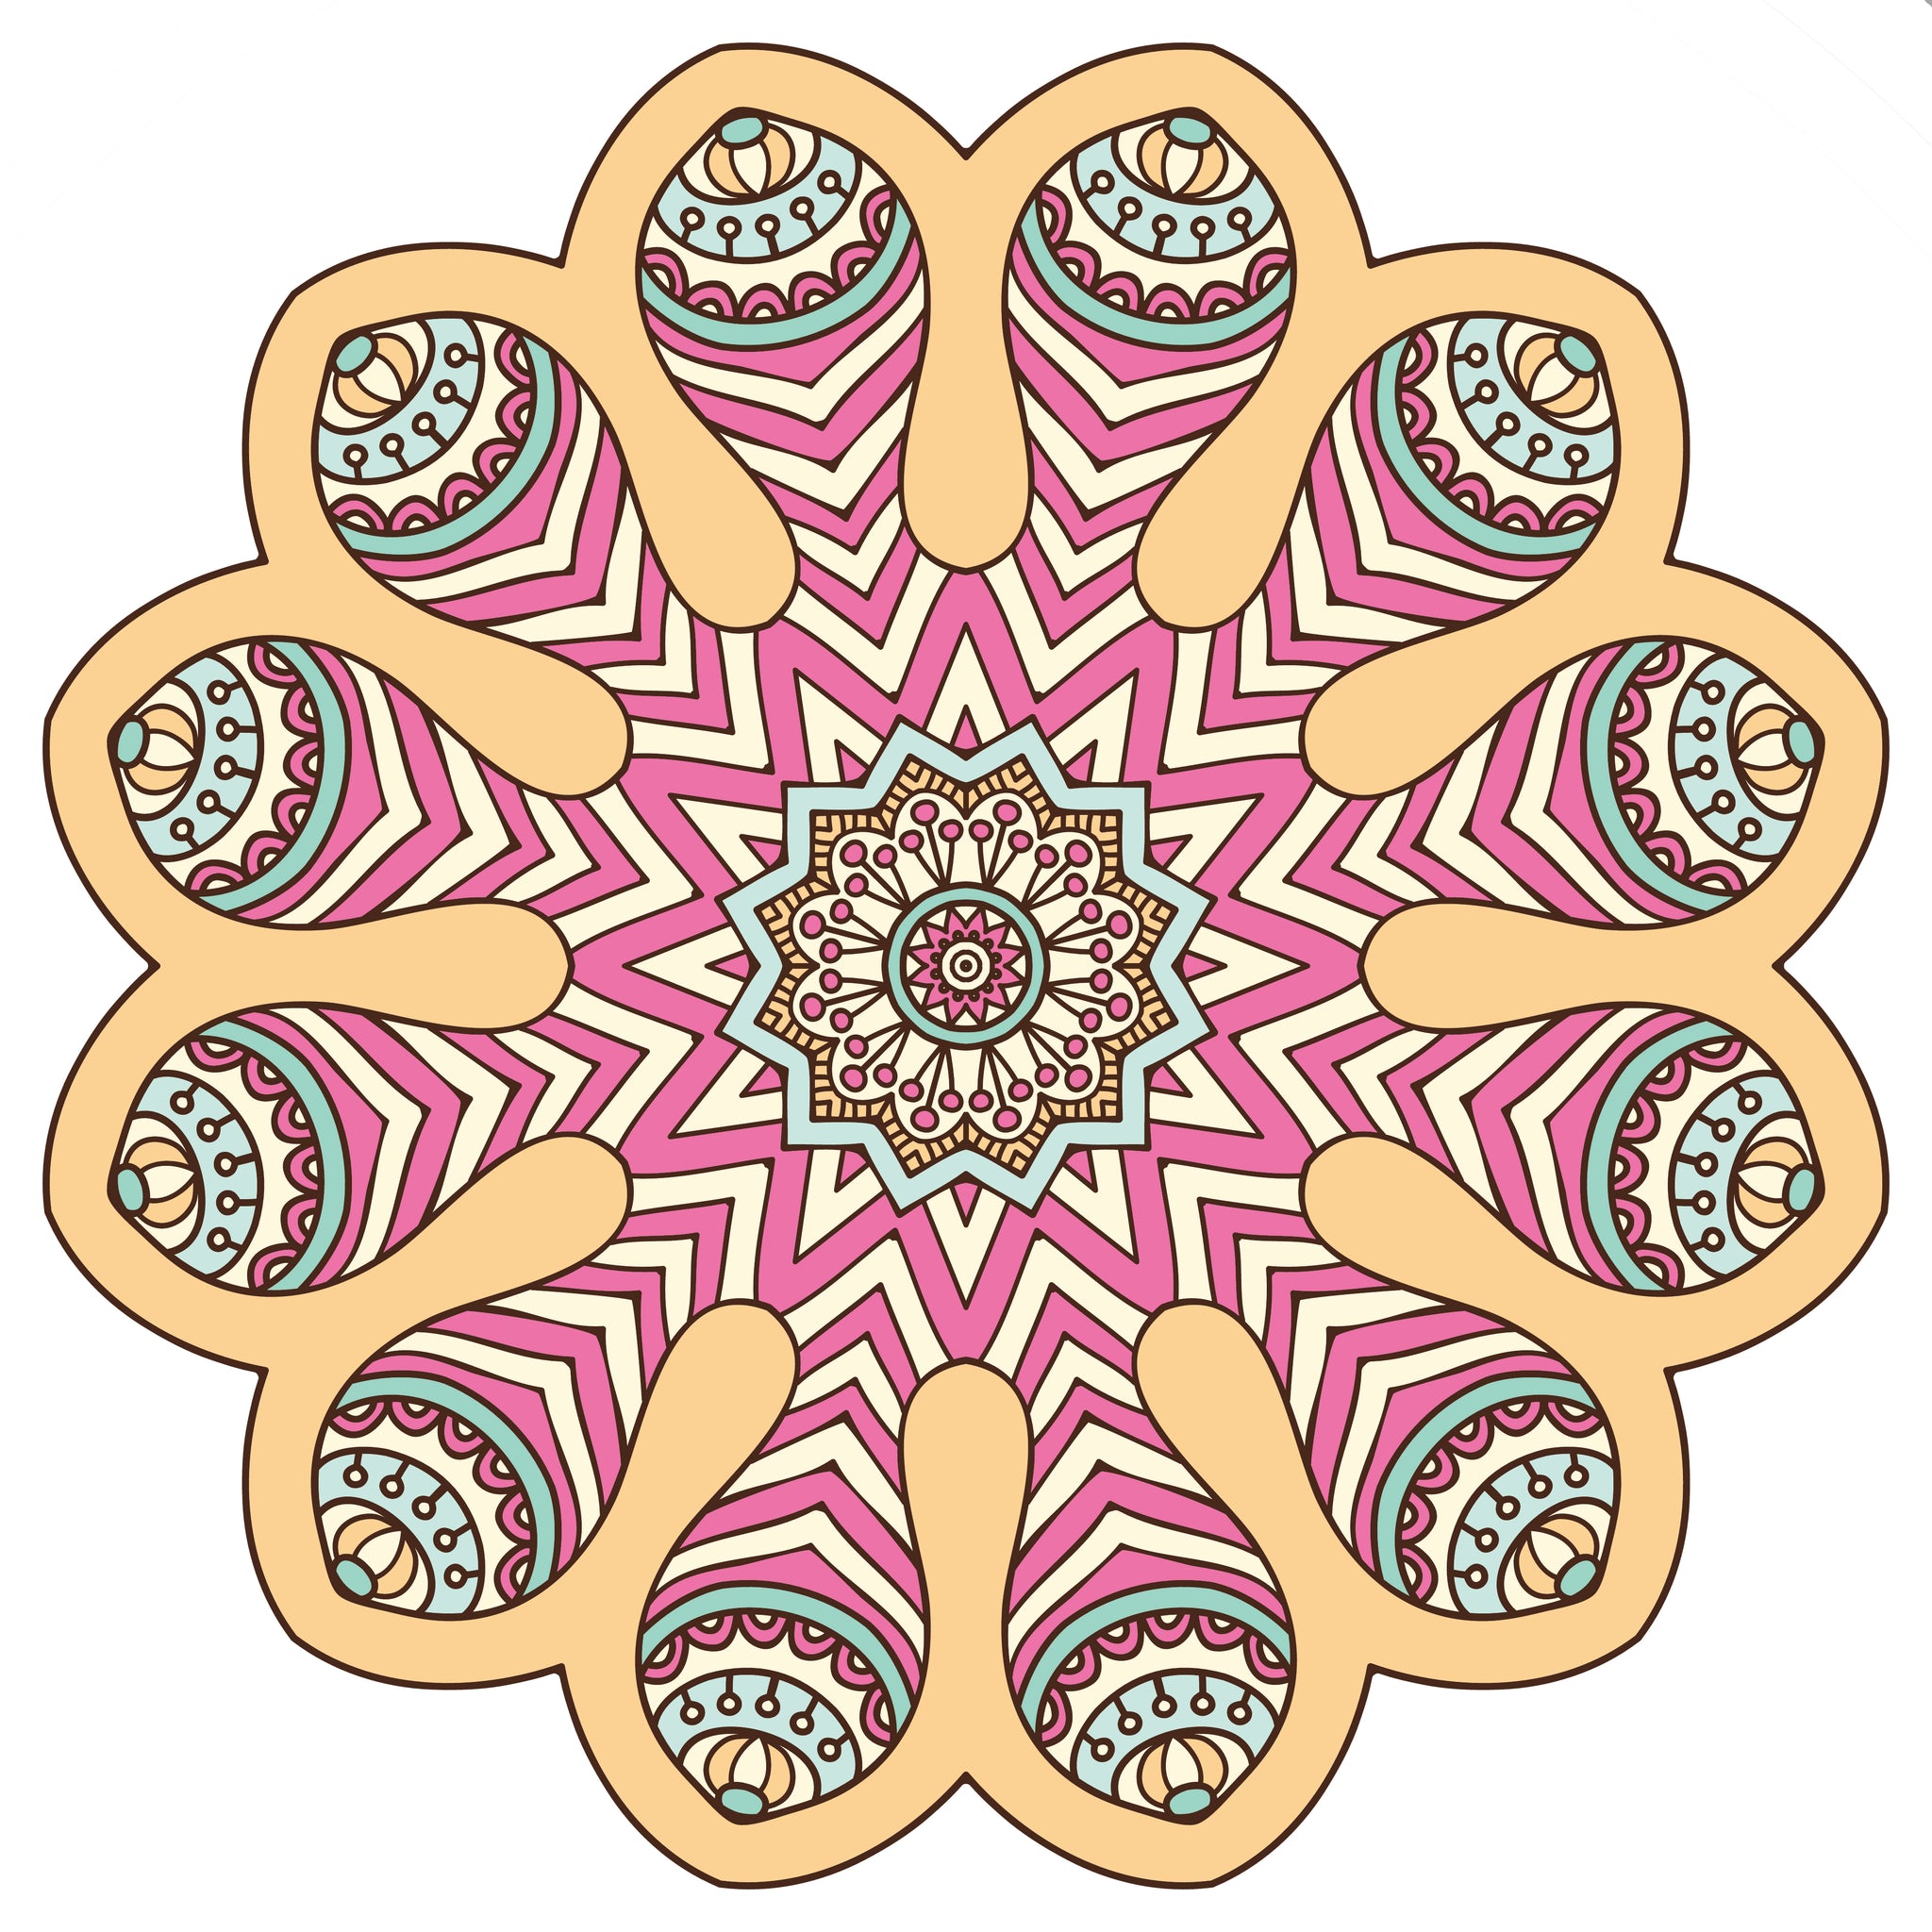 Pink and Yellow Mandala Patterned Flower Vinyl Decal Sticker